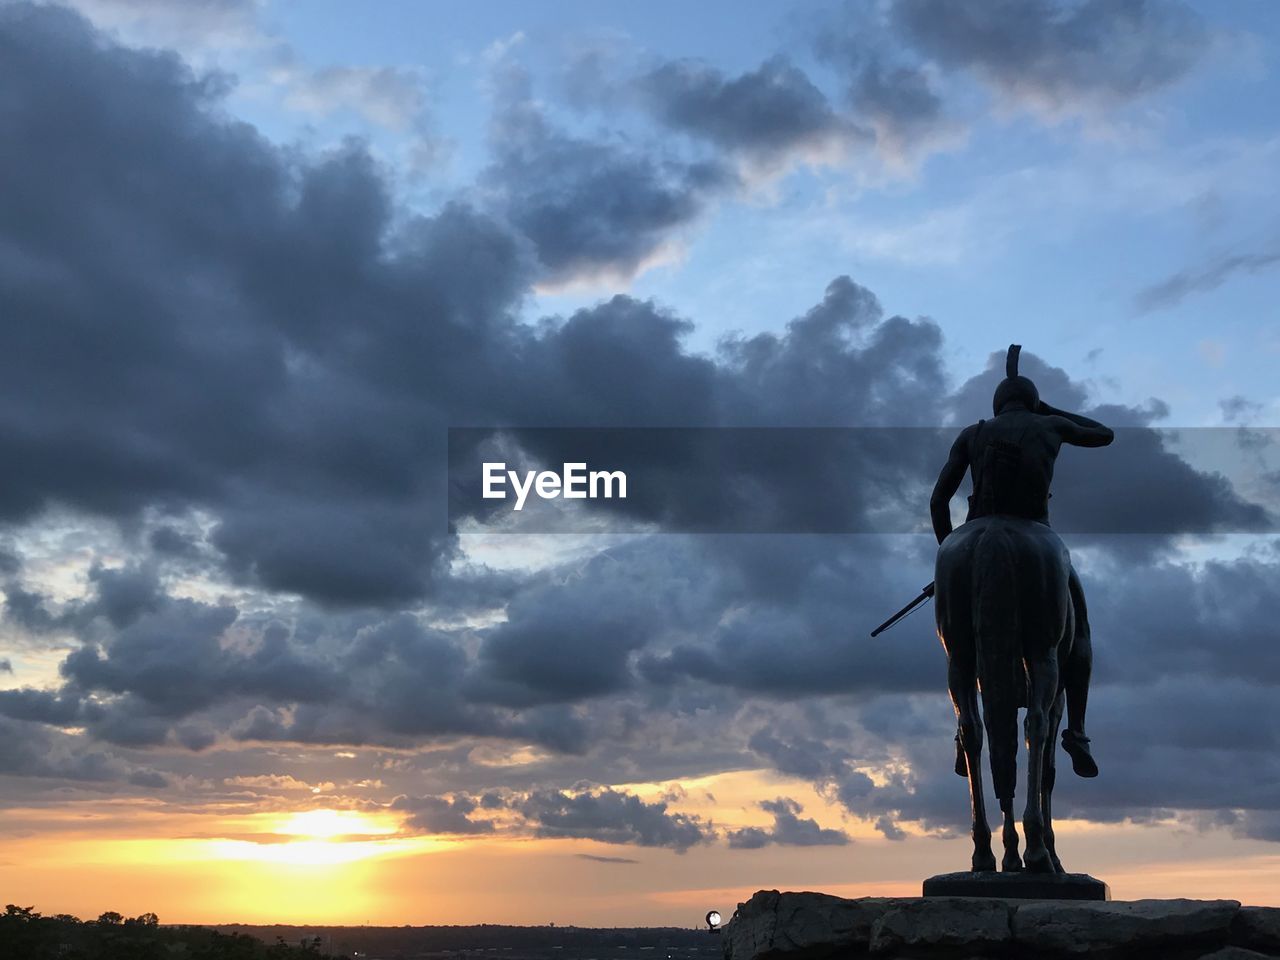 Statue of the scout against sky during sunset